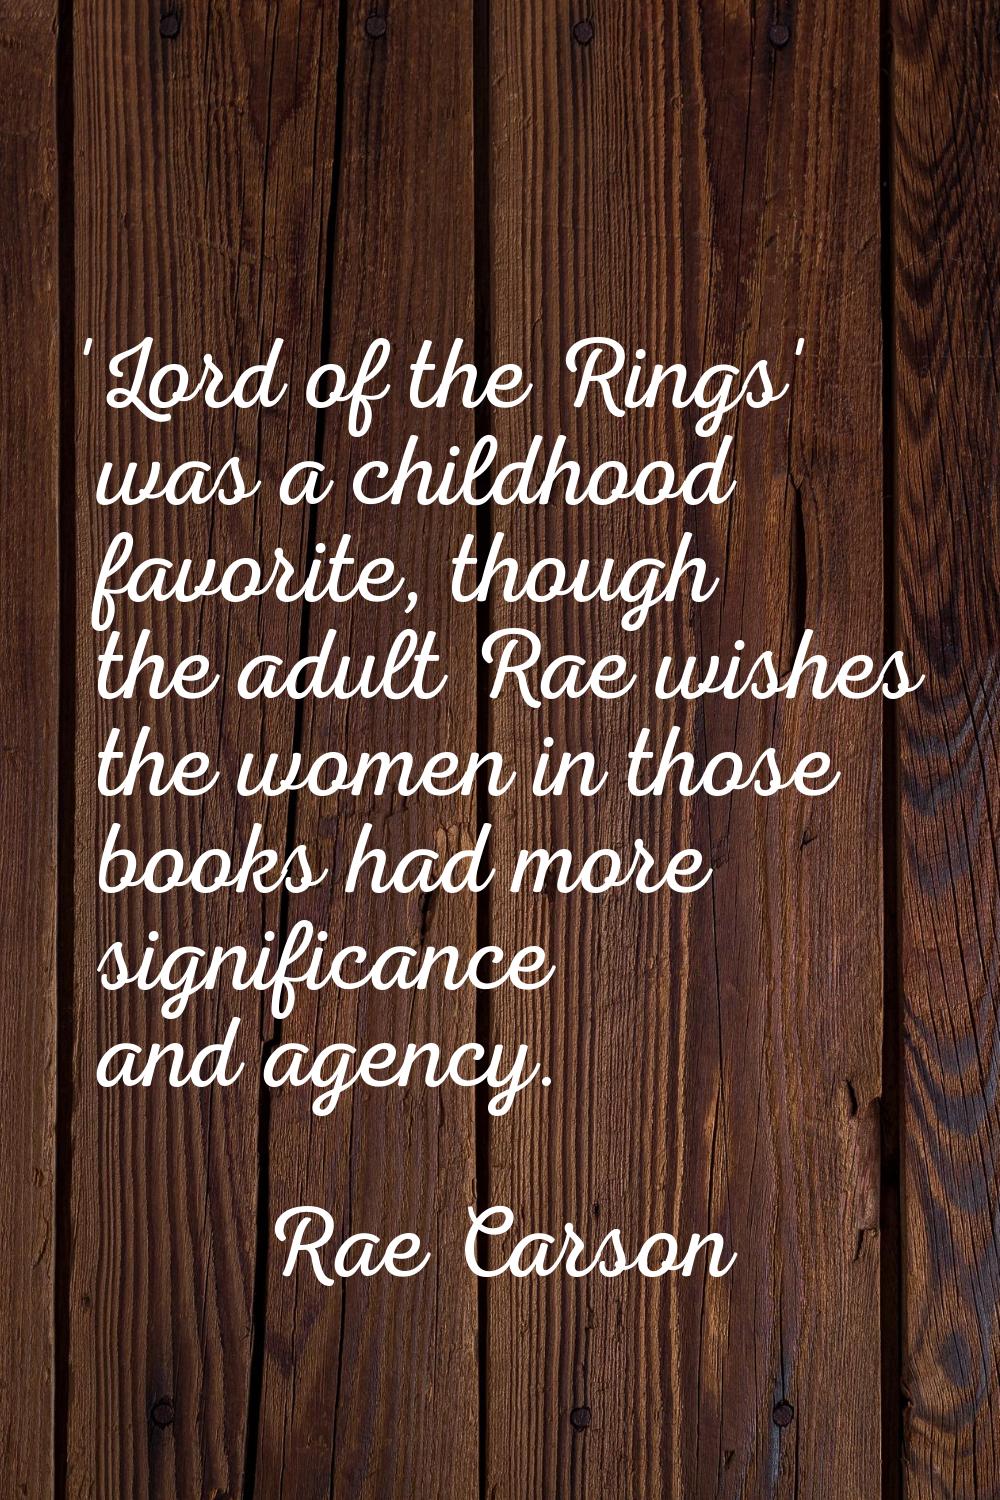 'Lord of the Rings' was a childhood favorite, though the adult Rae wishes the women in those books 